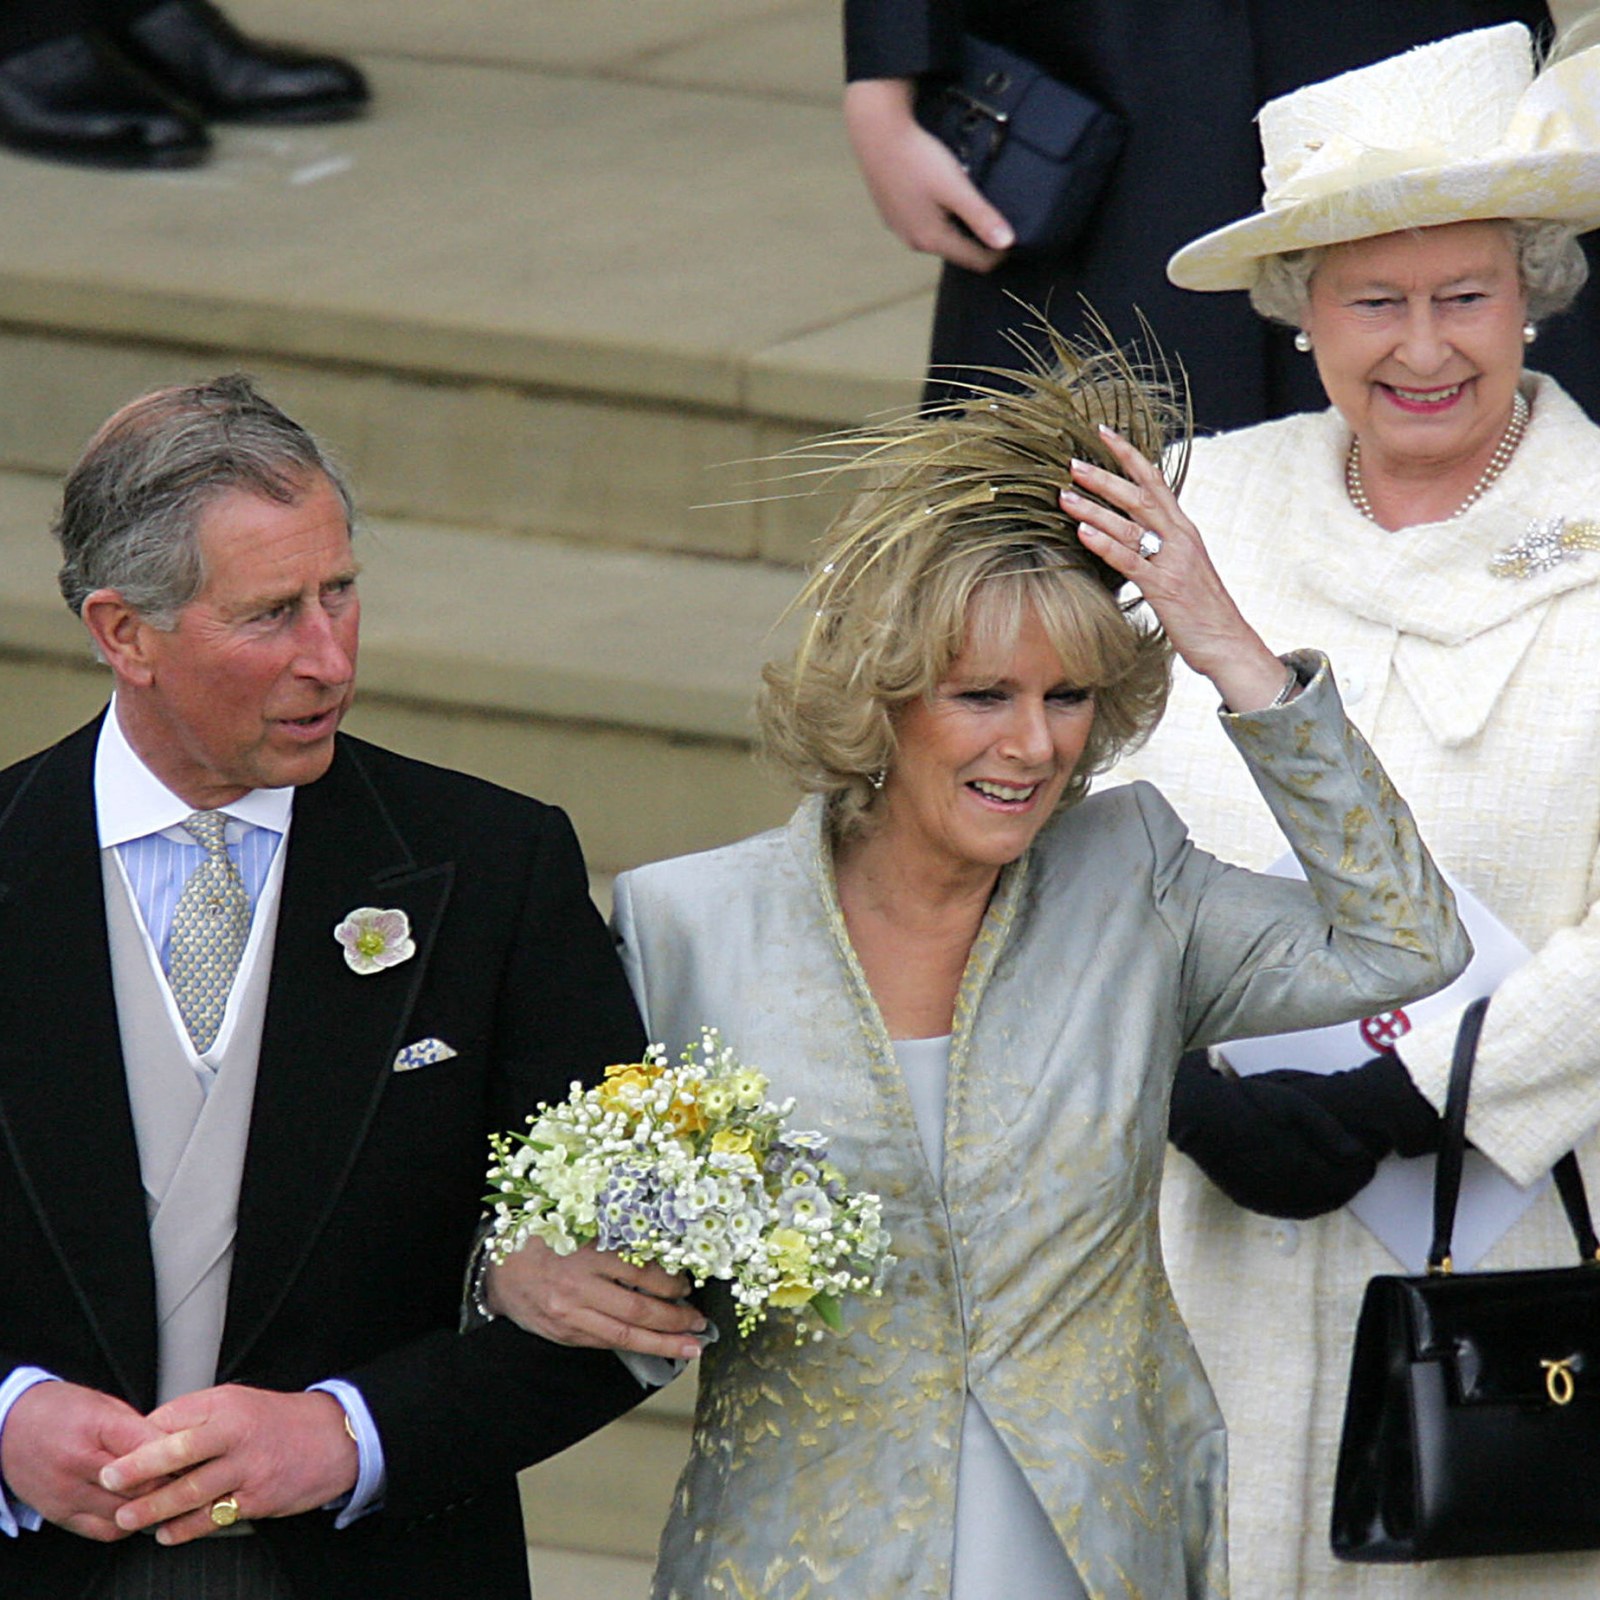 Viral Theory Explains Why Queen Wore White to Charles, Camilla's Wedding